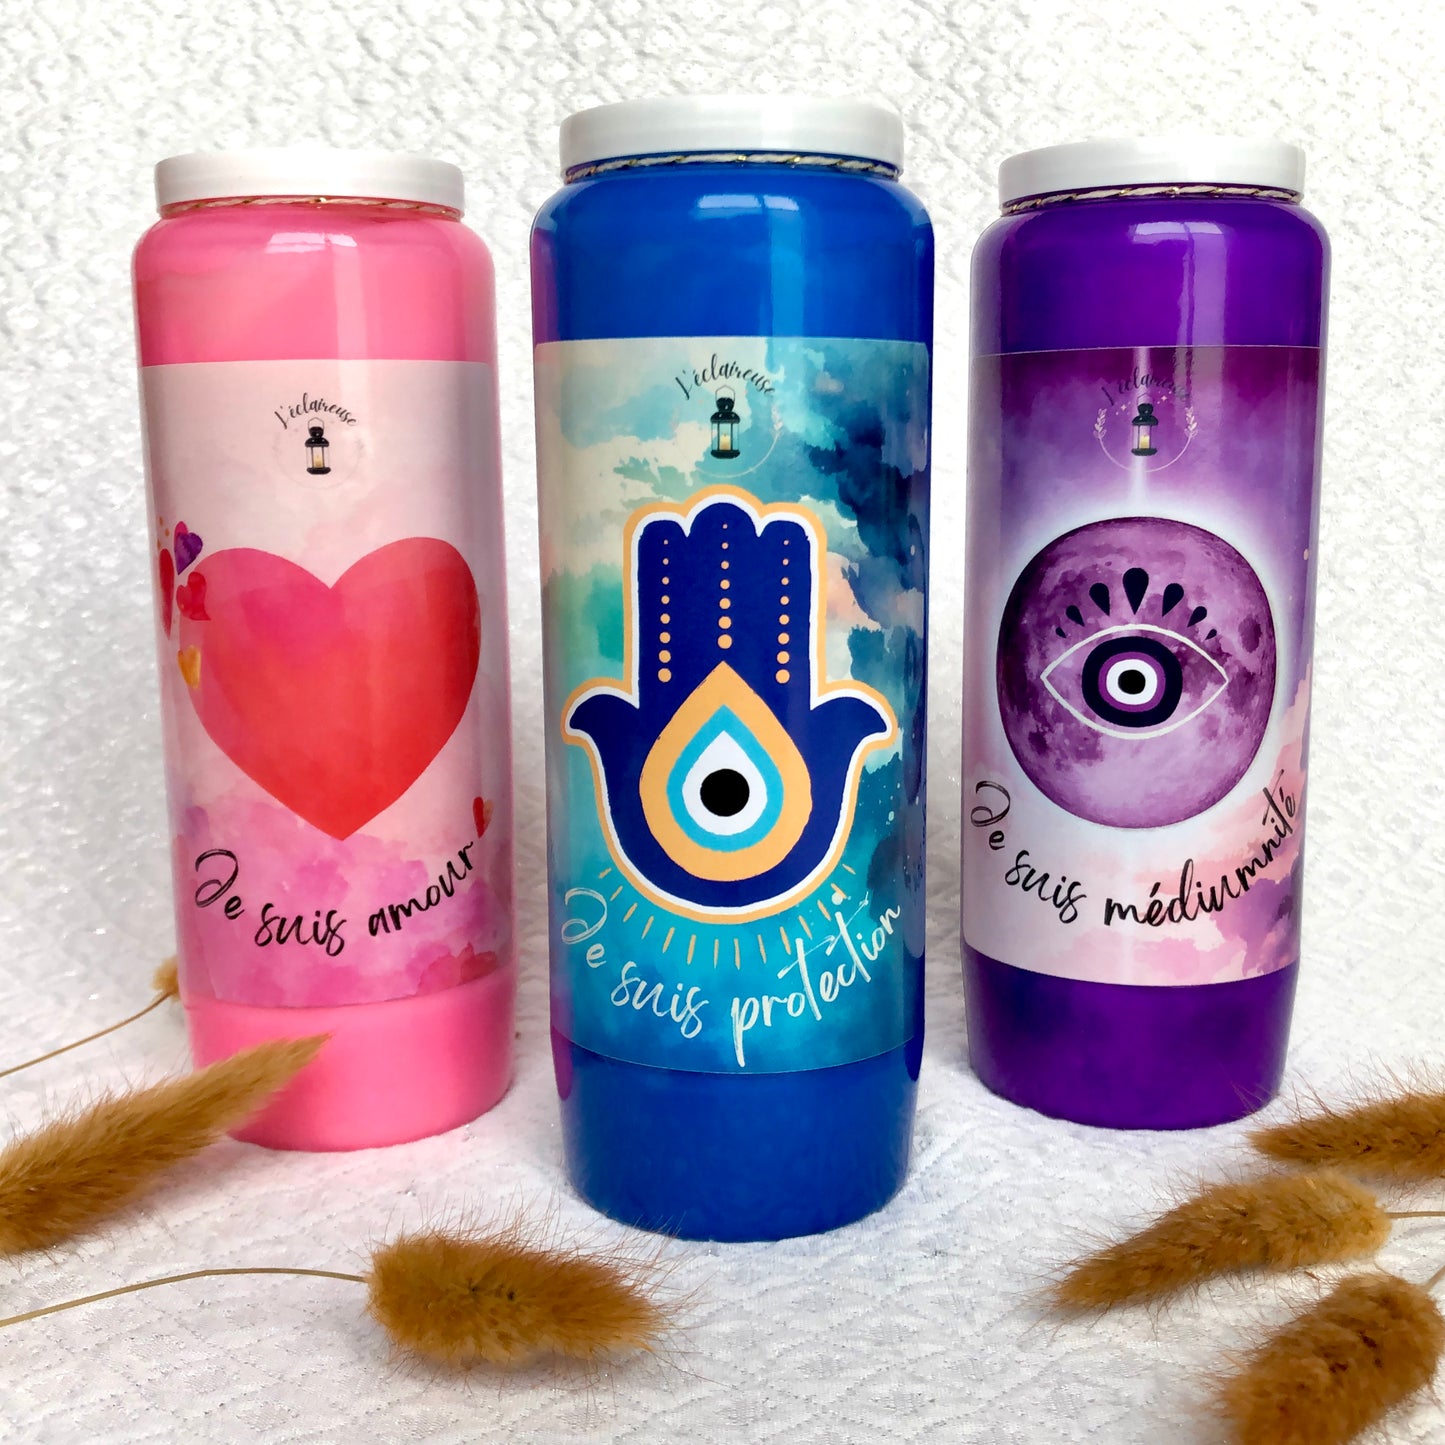 Novena candle "I am protection" ~to protect yourself from negative energies~